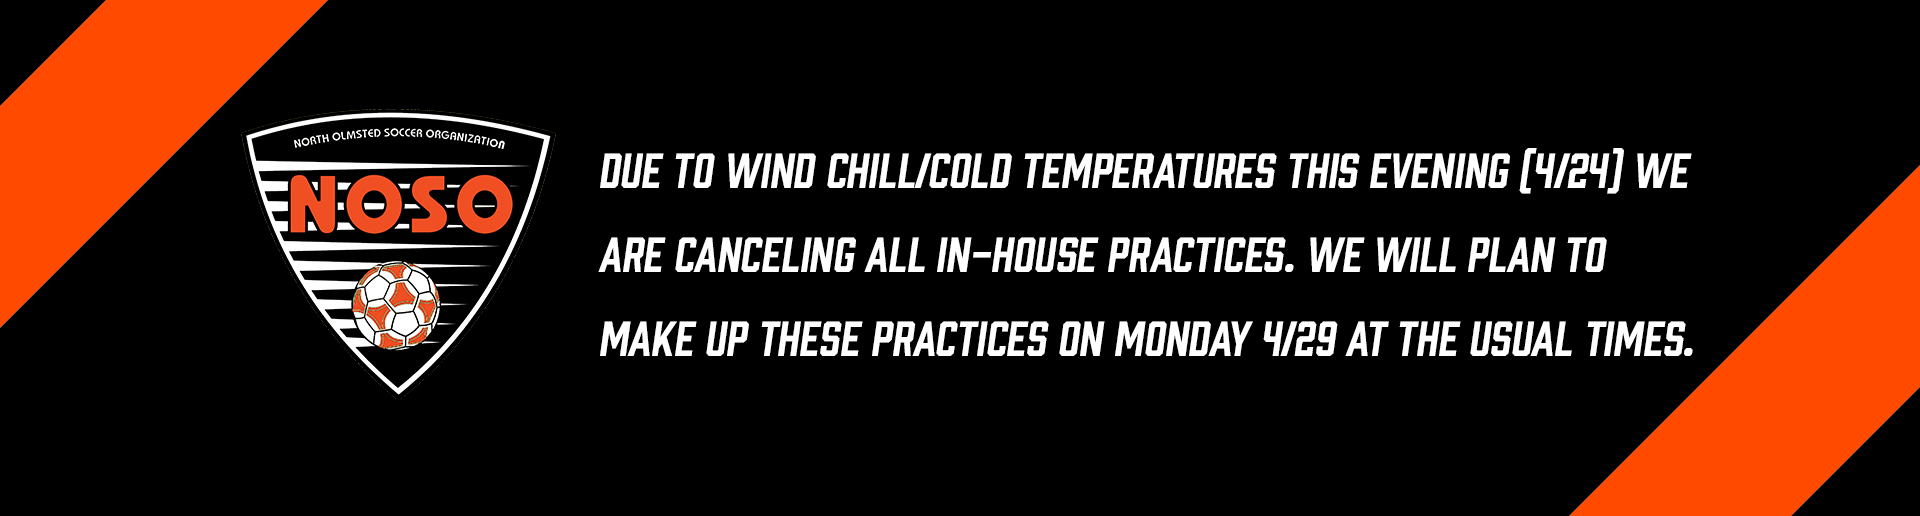 In-House Practices Canceled 4/24